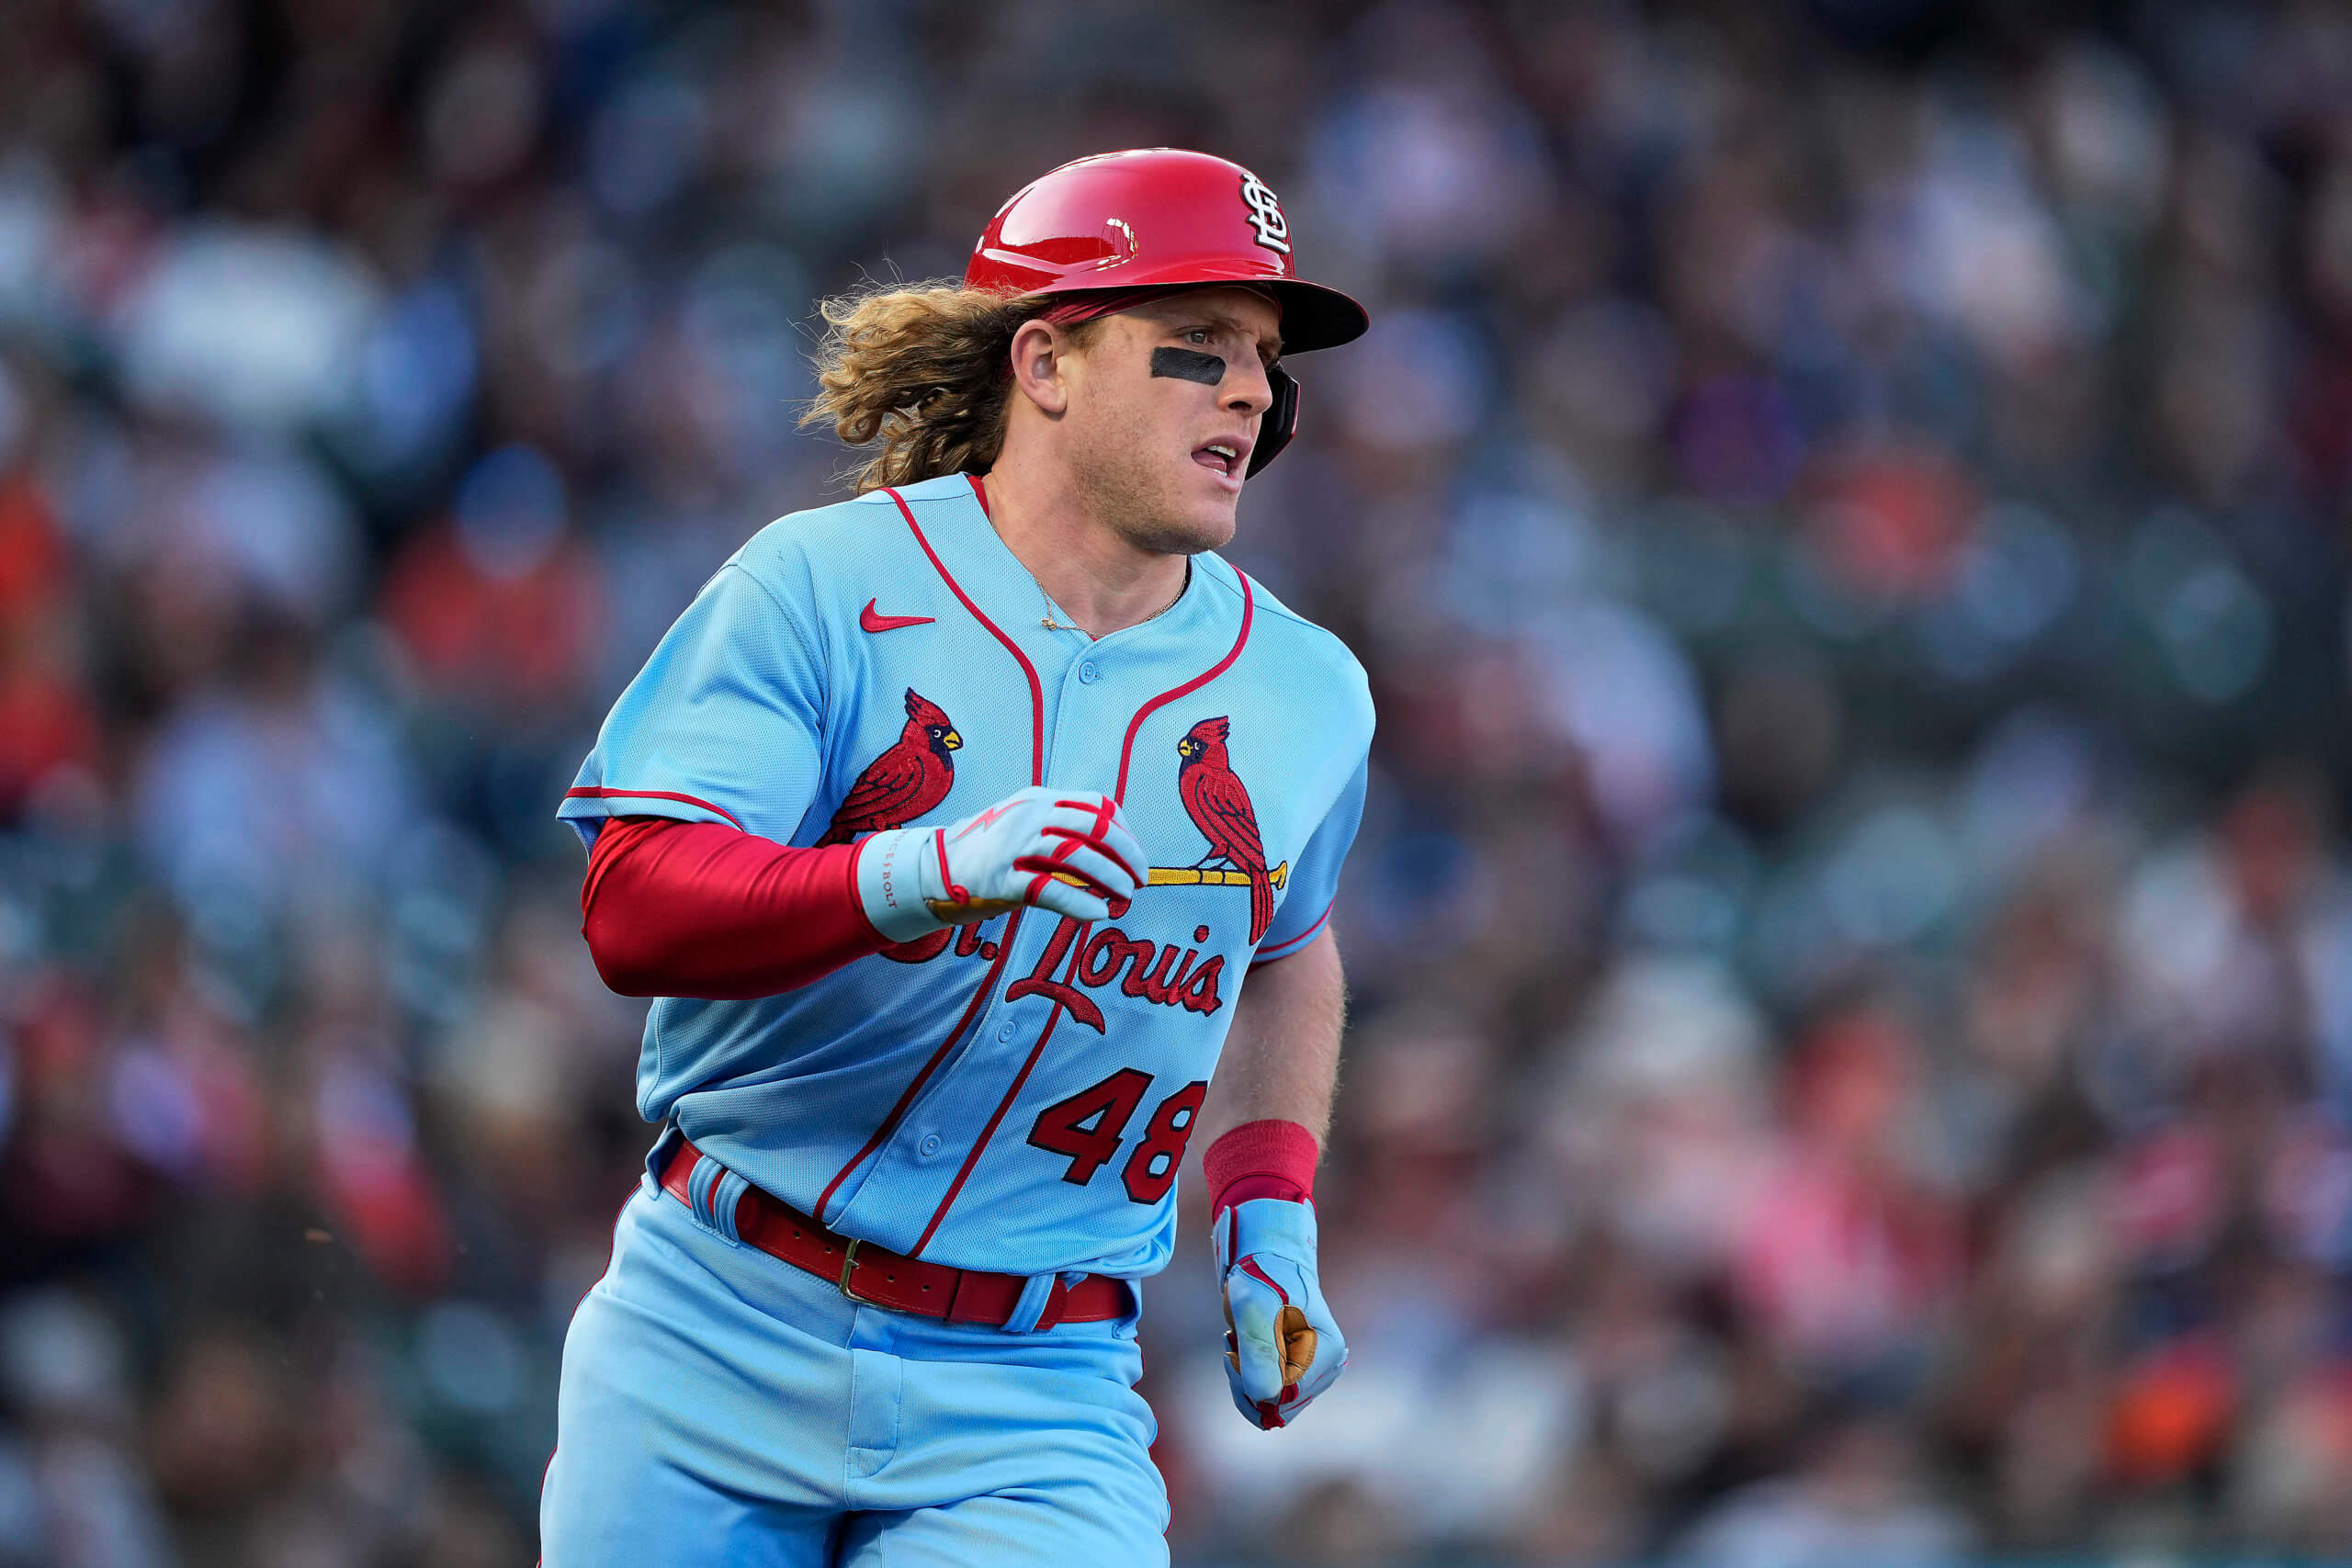 Before he plays for Team Israel, Harrison Bader rescues the